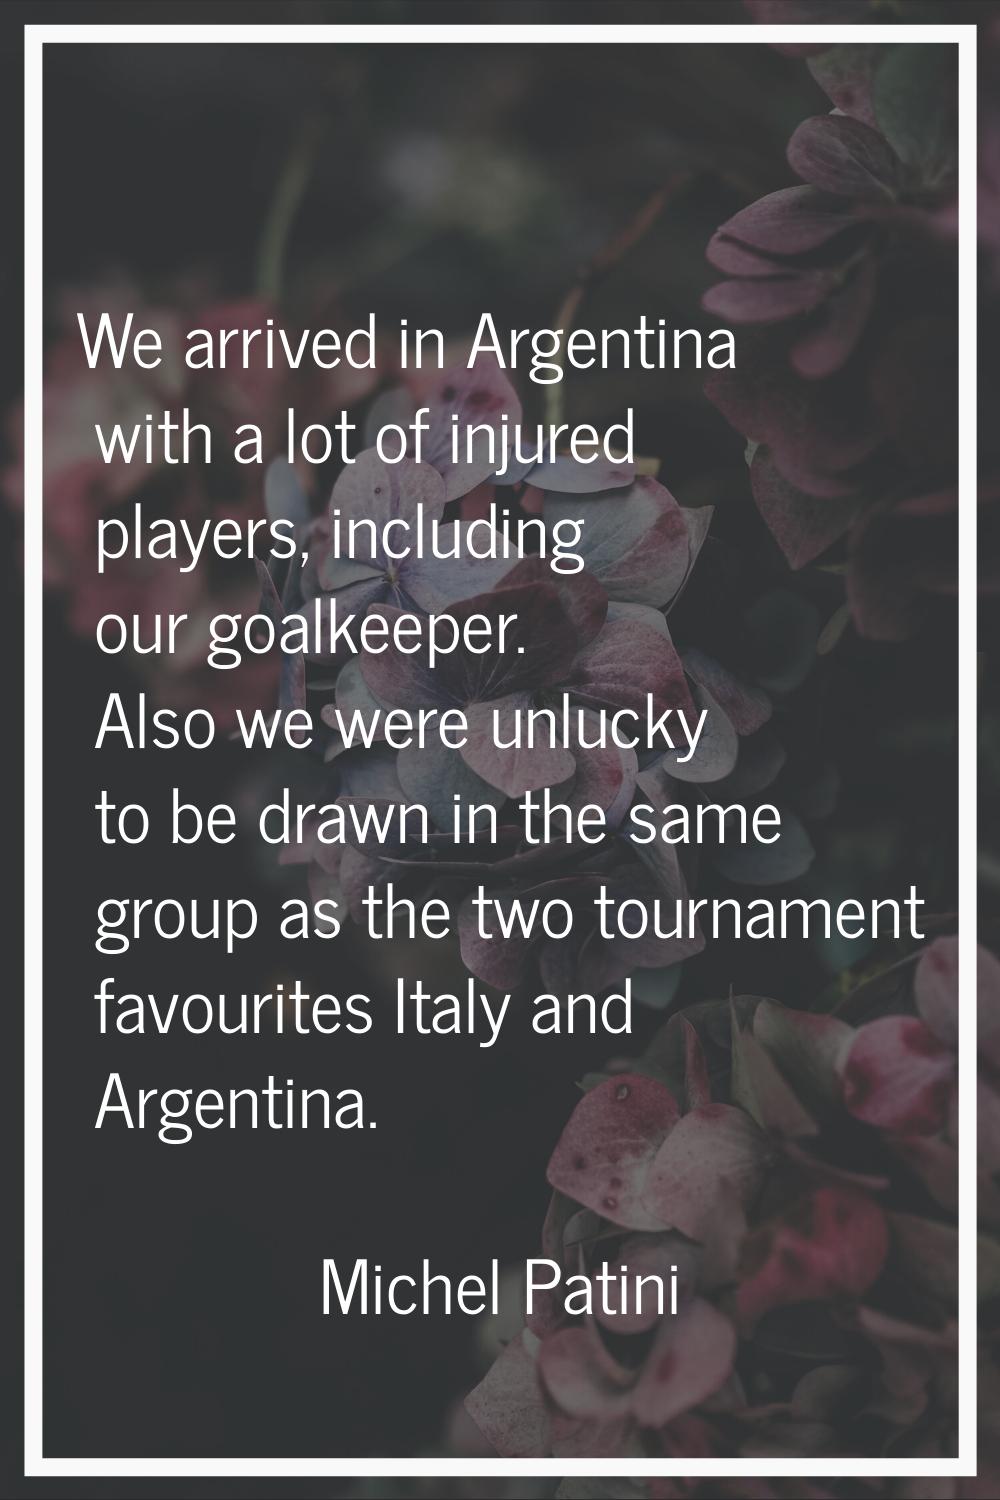 We arrived in Argentina with a lot of injured players, including our goalkeeper. Also we were unluc